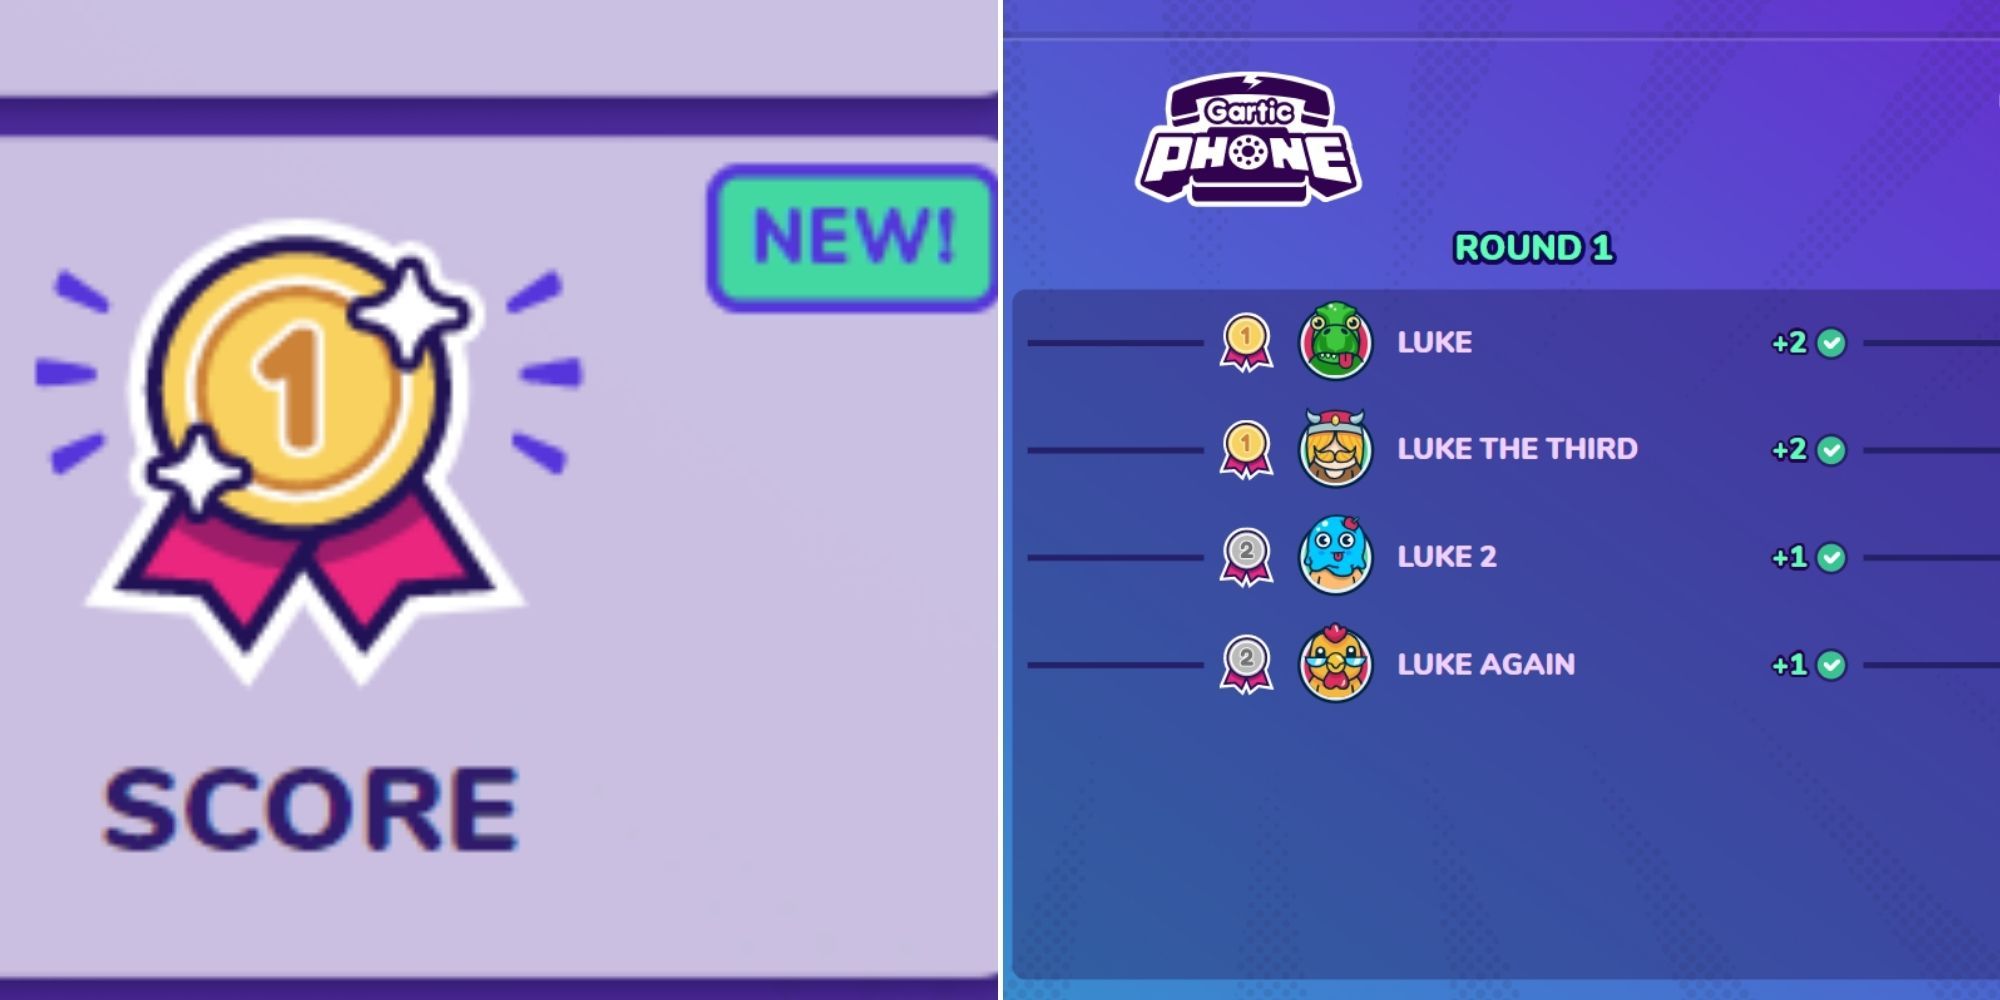 Gartic Phone - Score Logo - The points system at the end of the round